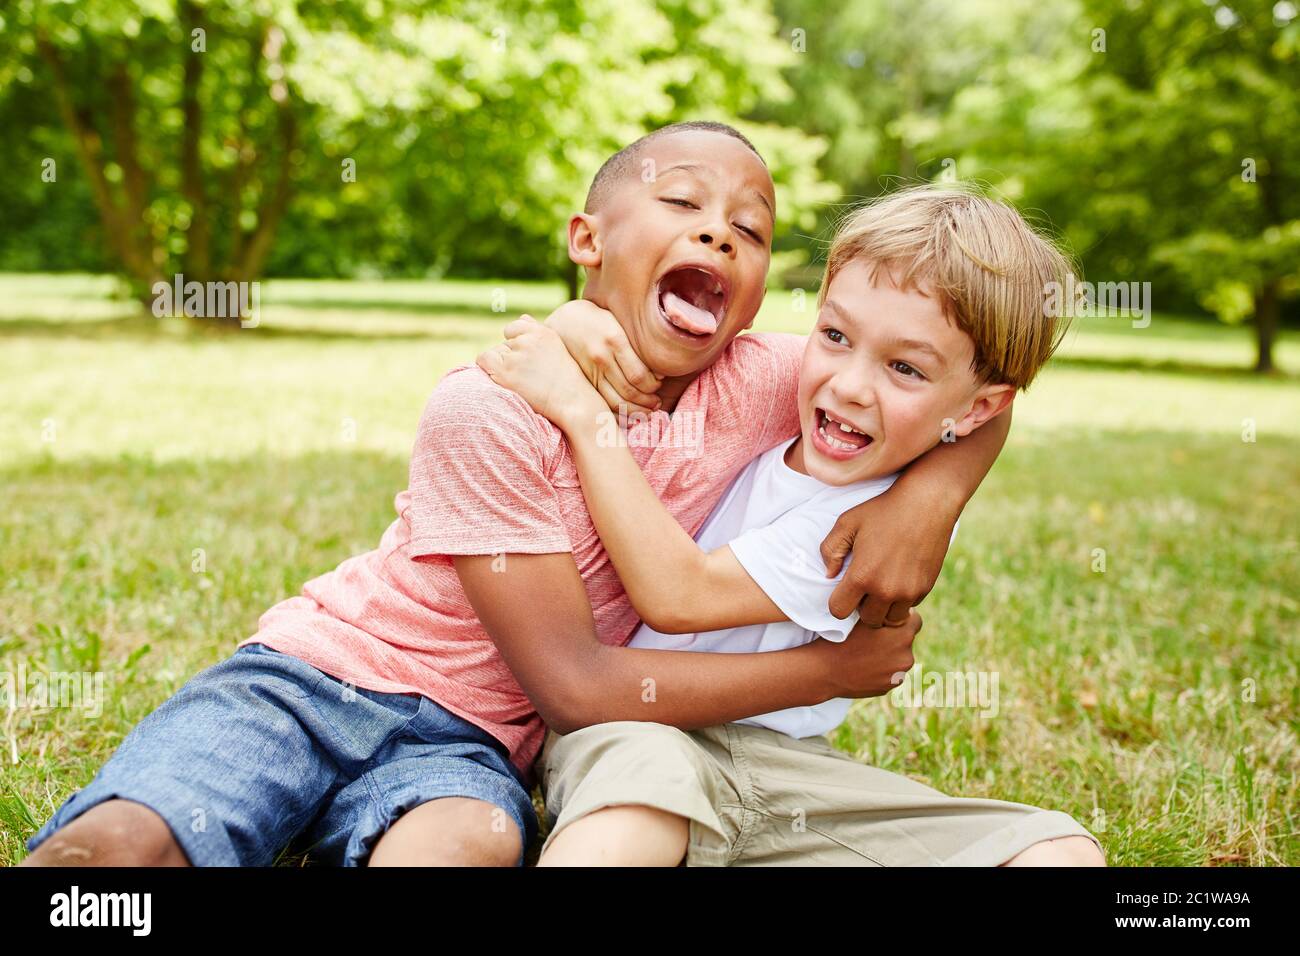 Two children fight and fight together in kindergarten Stock Photo